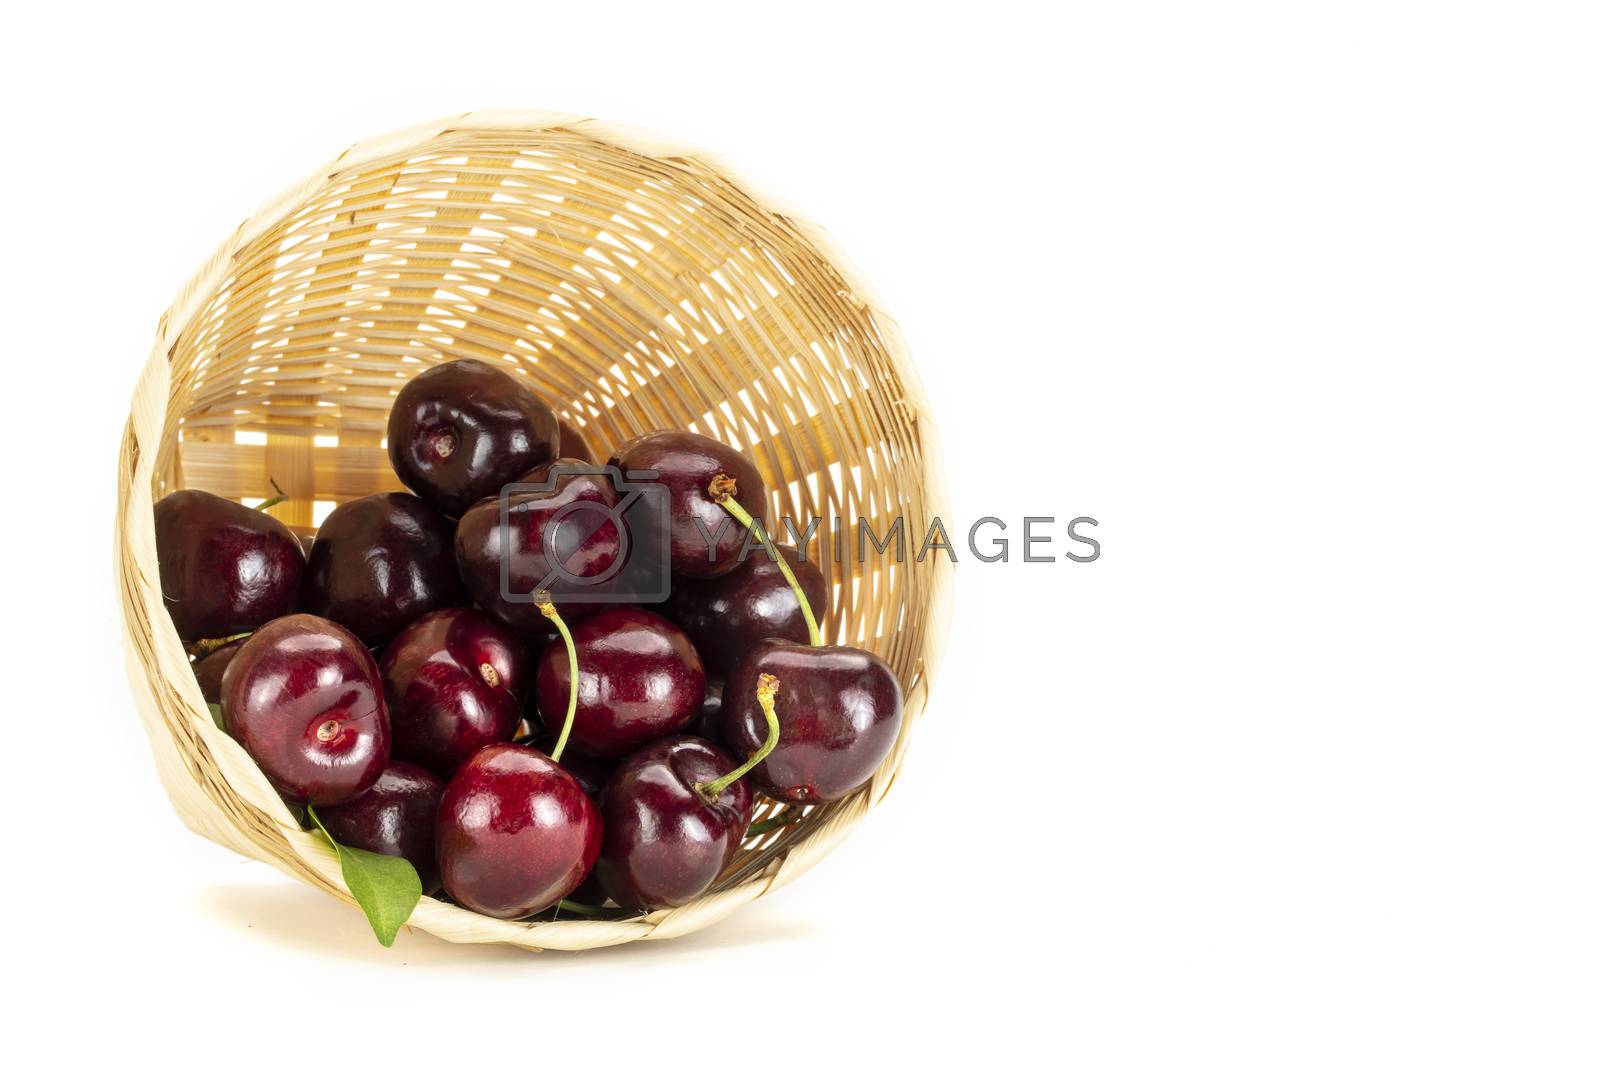 Royalty free image of Red cherries in a weave basket. by Nawoot